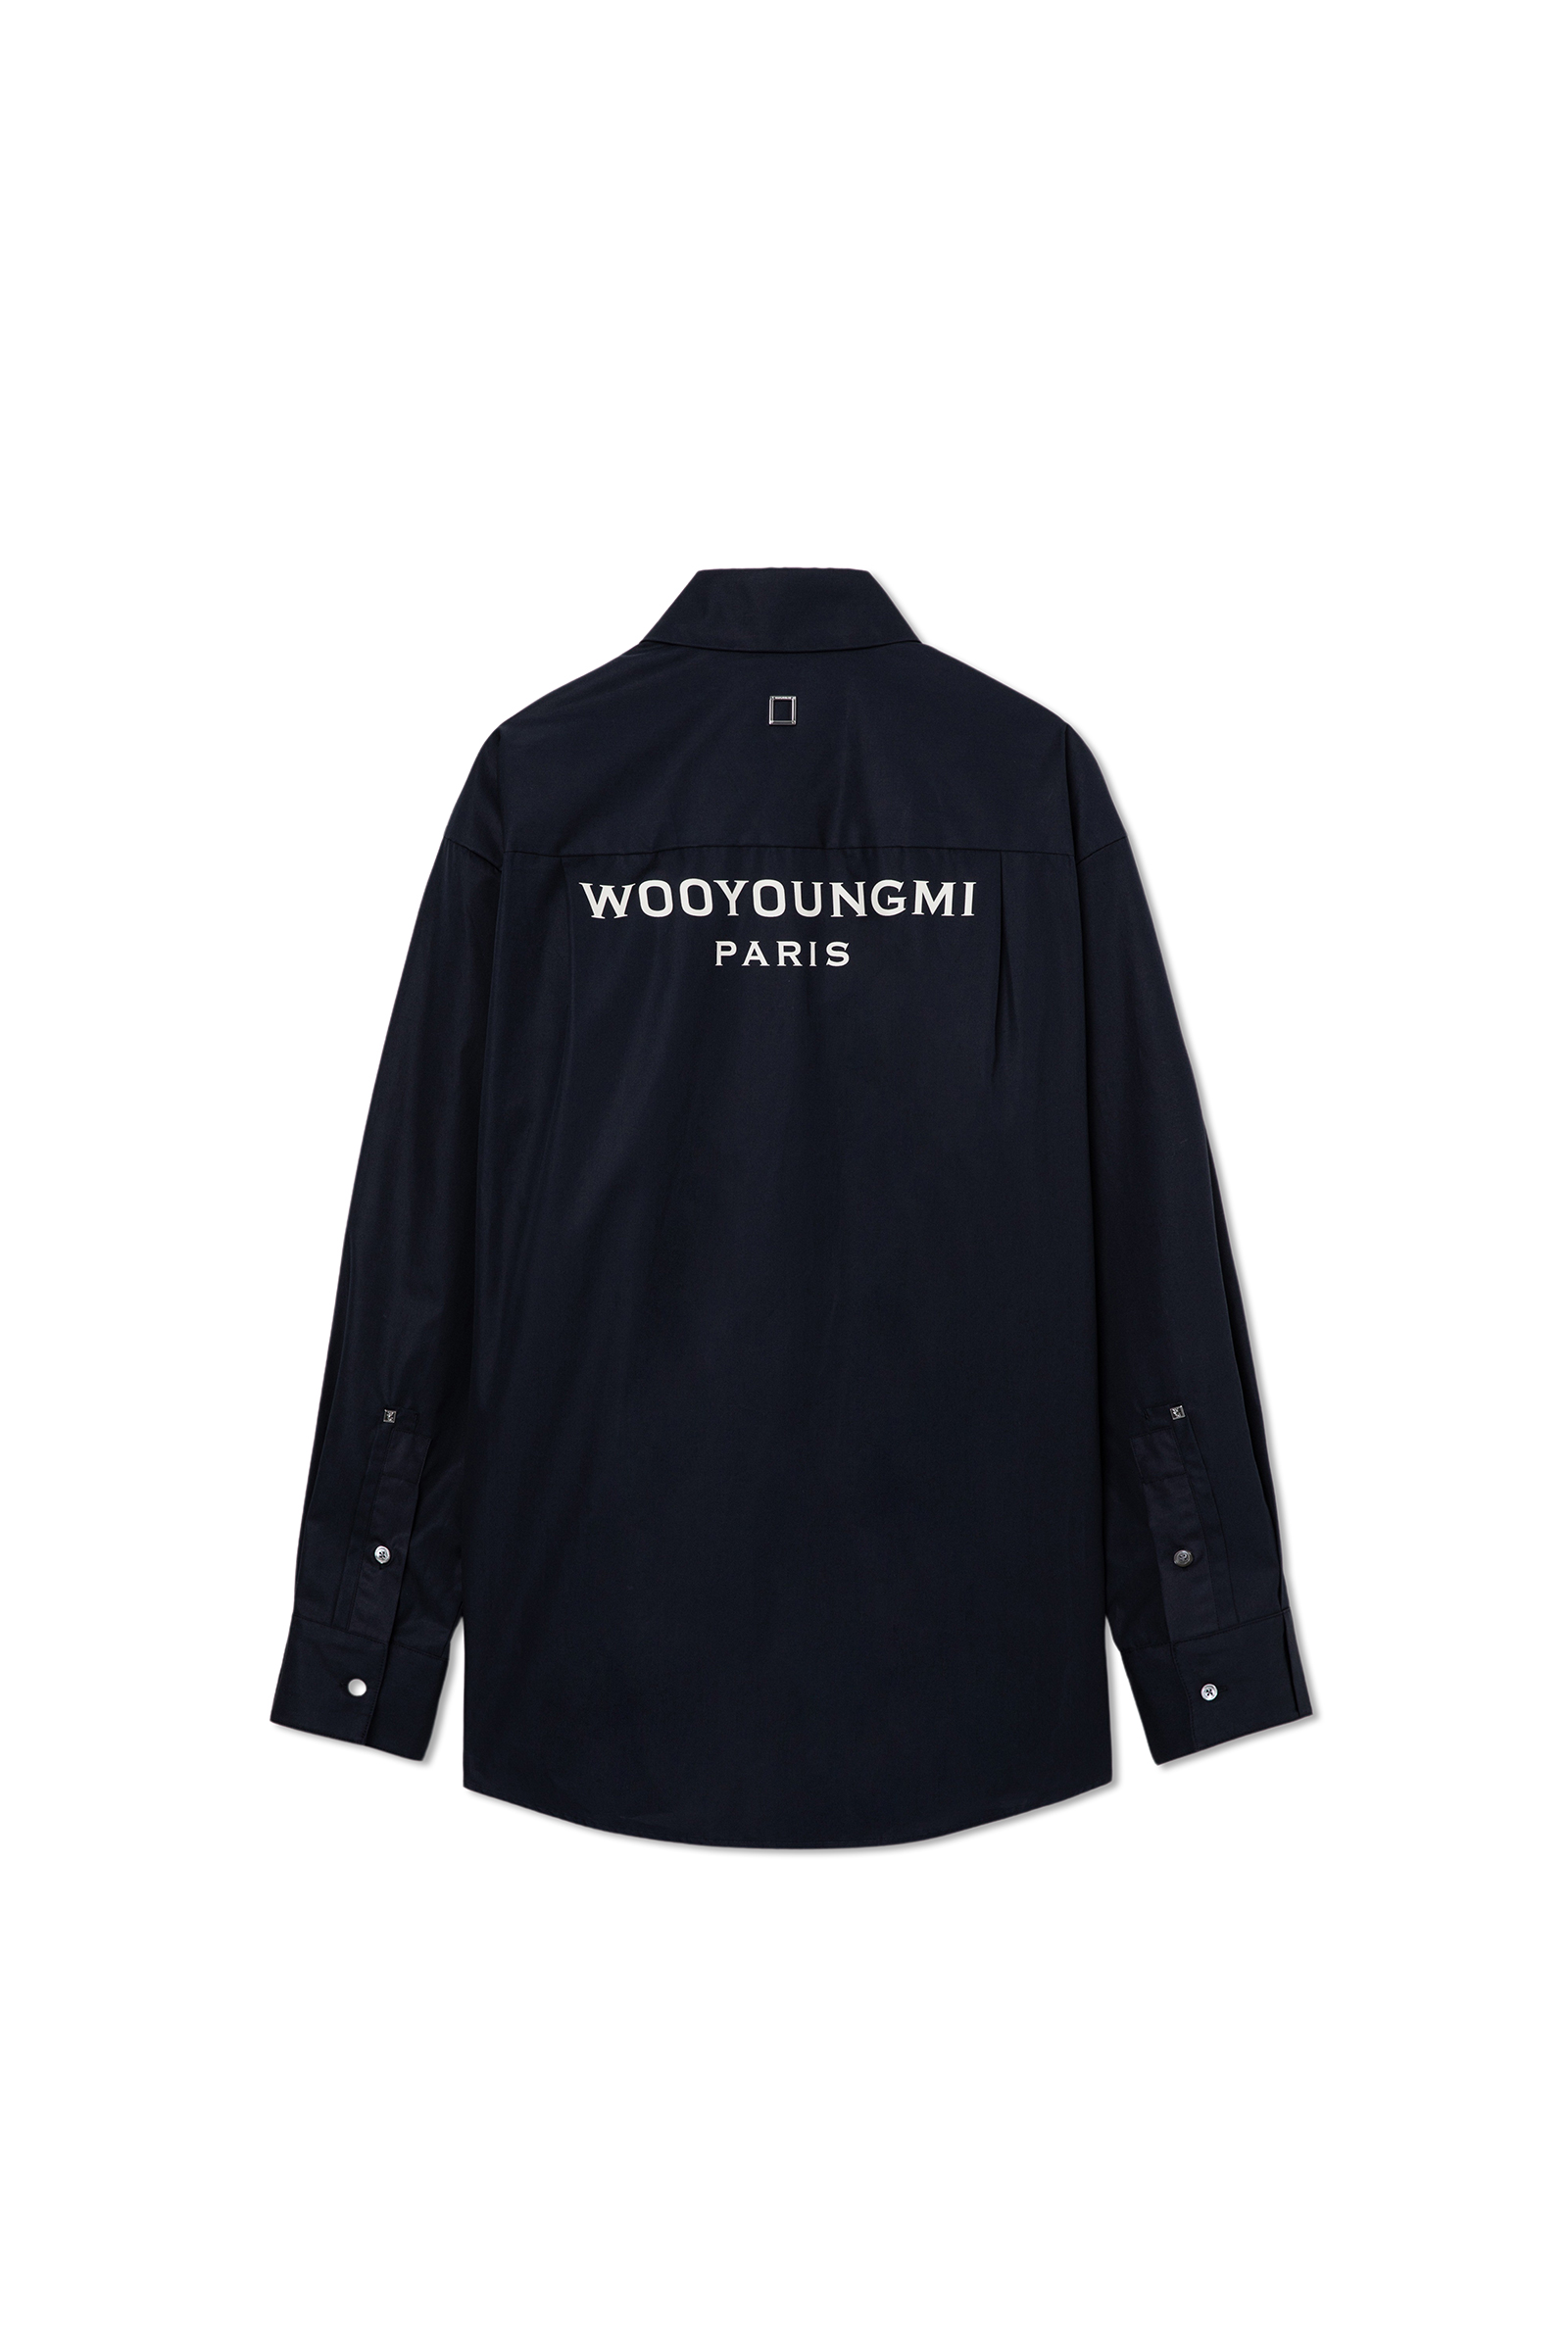 WOOYOUNGMI.COM | OFFICIAL ONLINE STORE